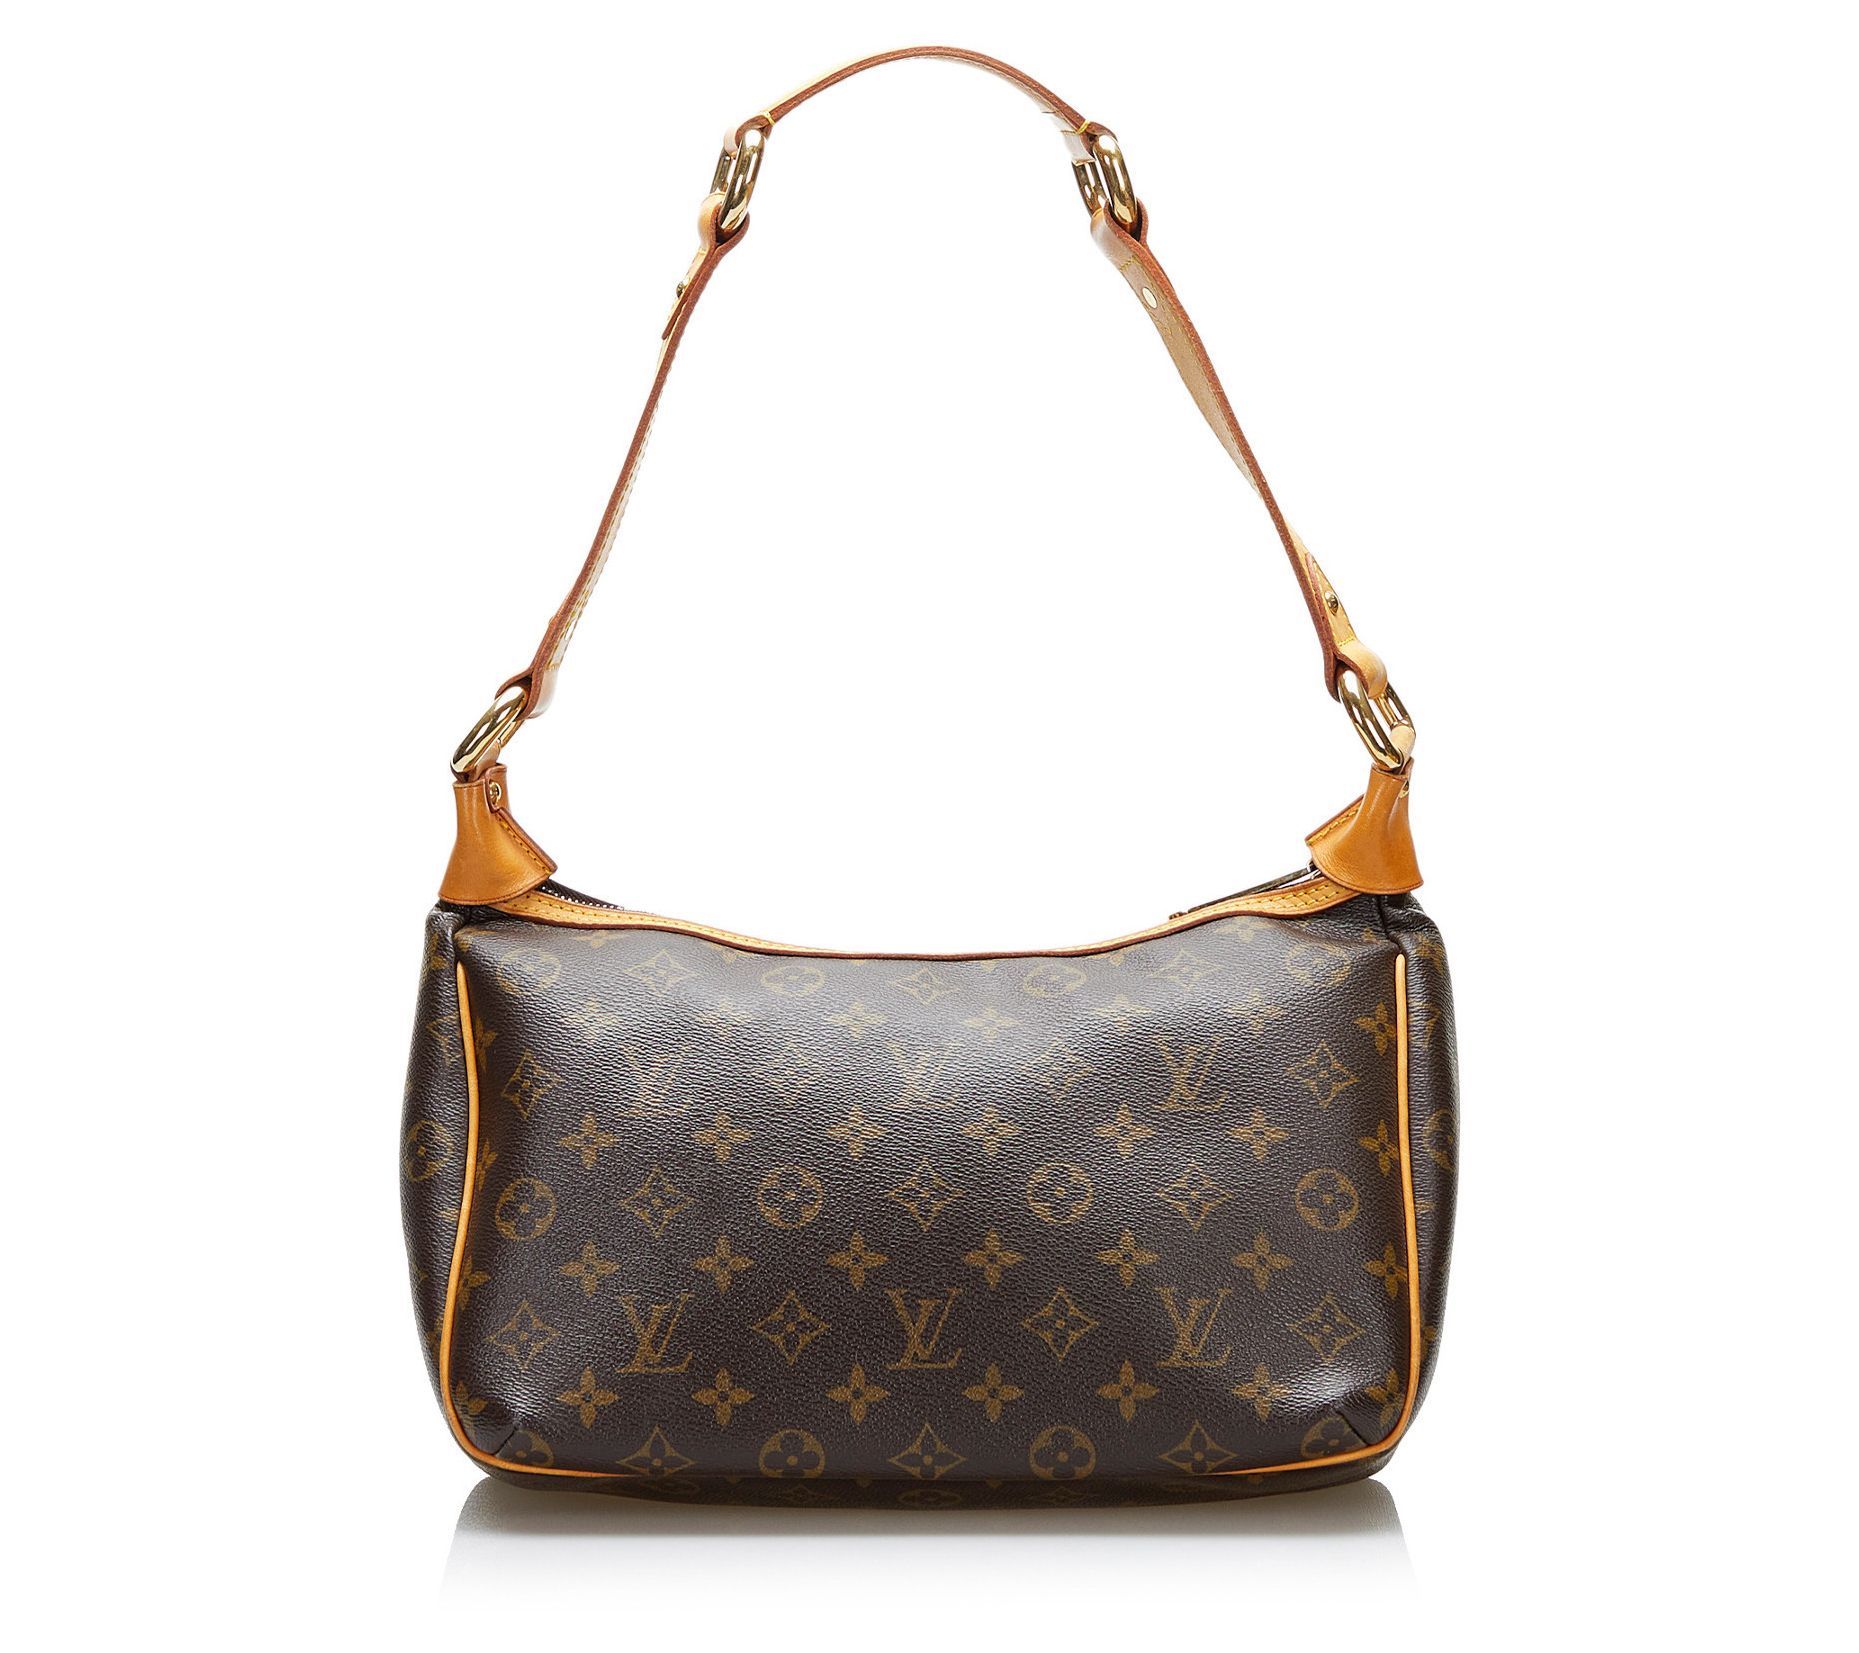 Louis Vuitton Boulogne Unboxing AND It's Going Back! 